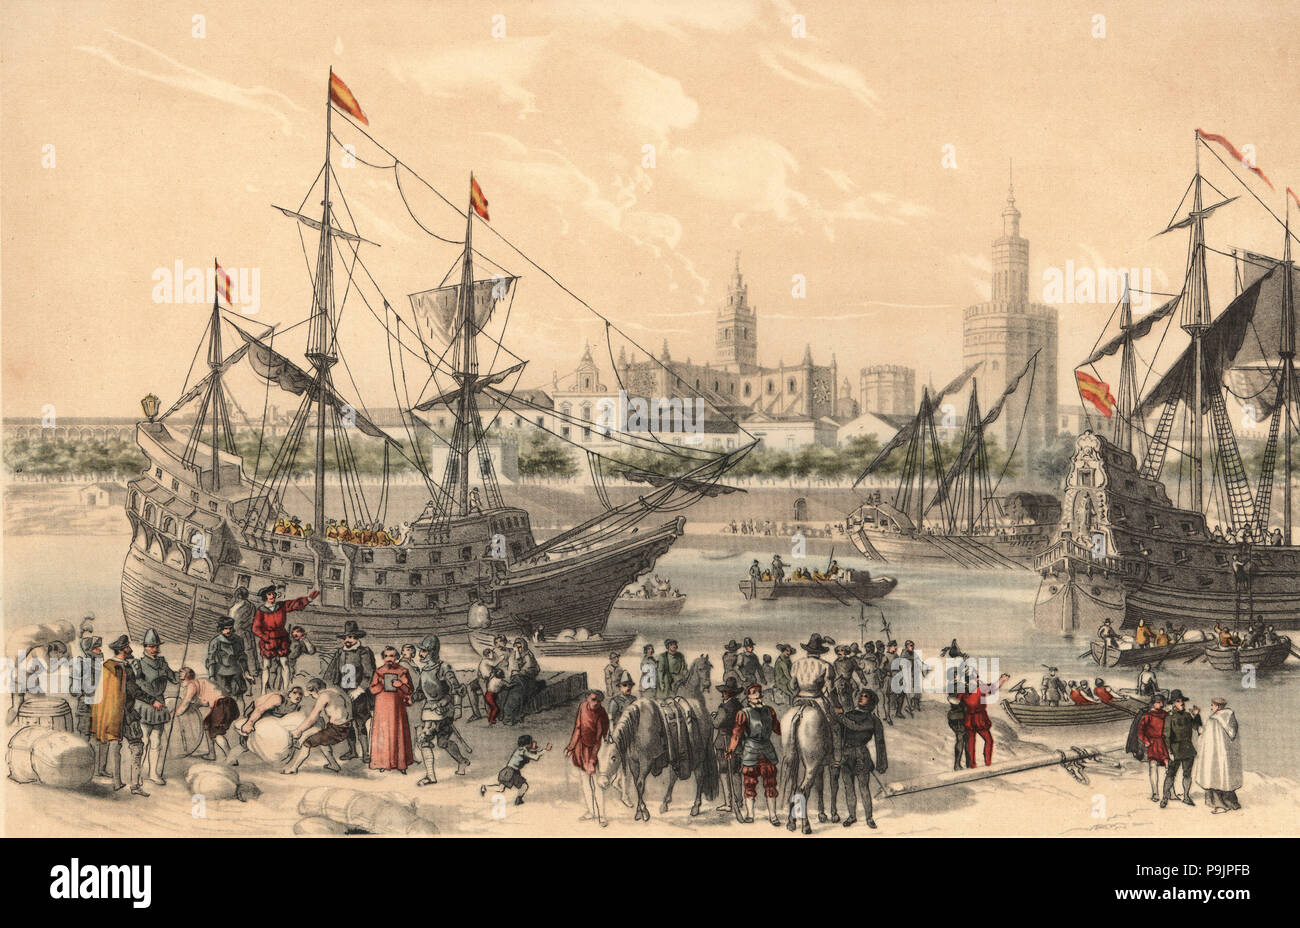 Francisco Pizarro preparing their ships in Sevilla, to go on an expedition to Peru. Stock Photo